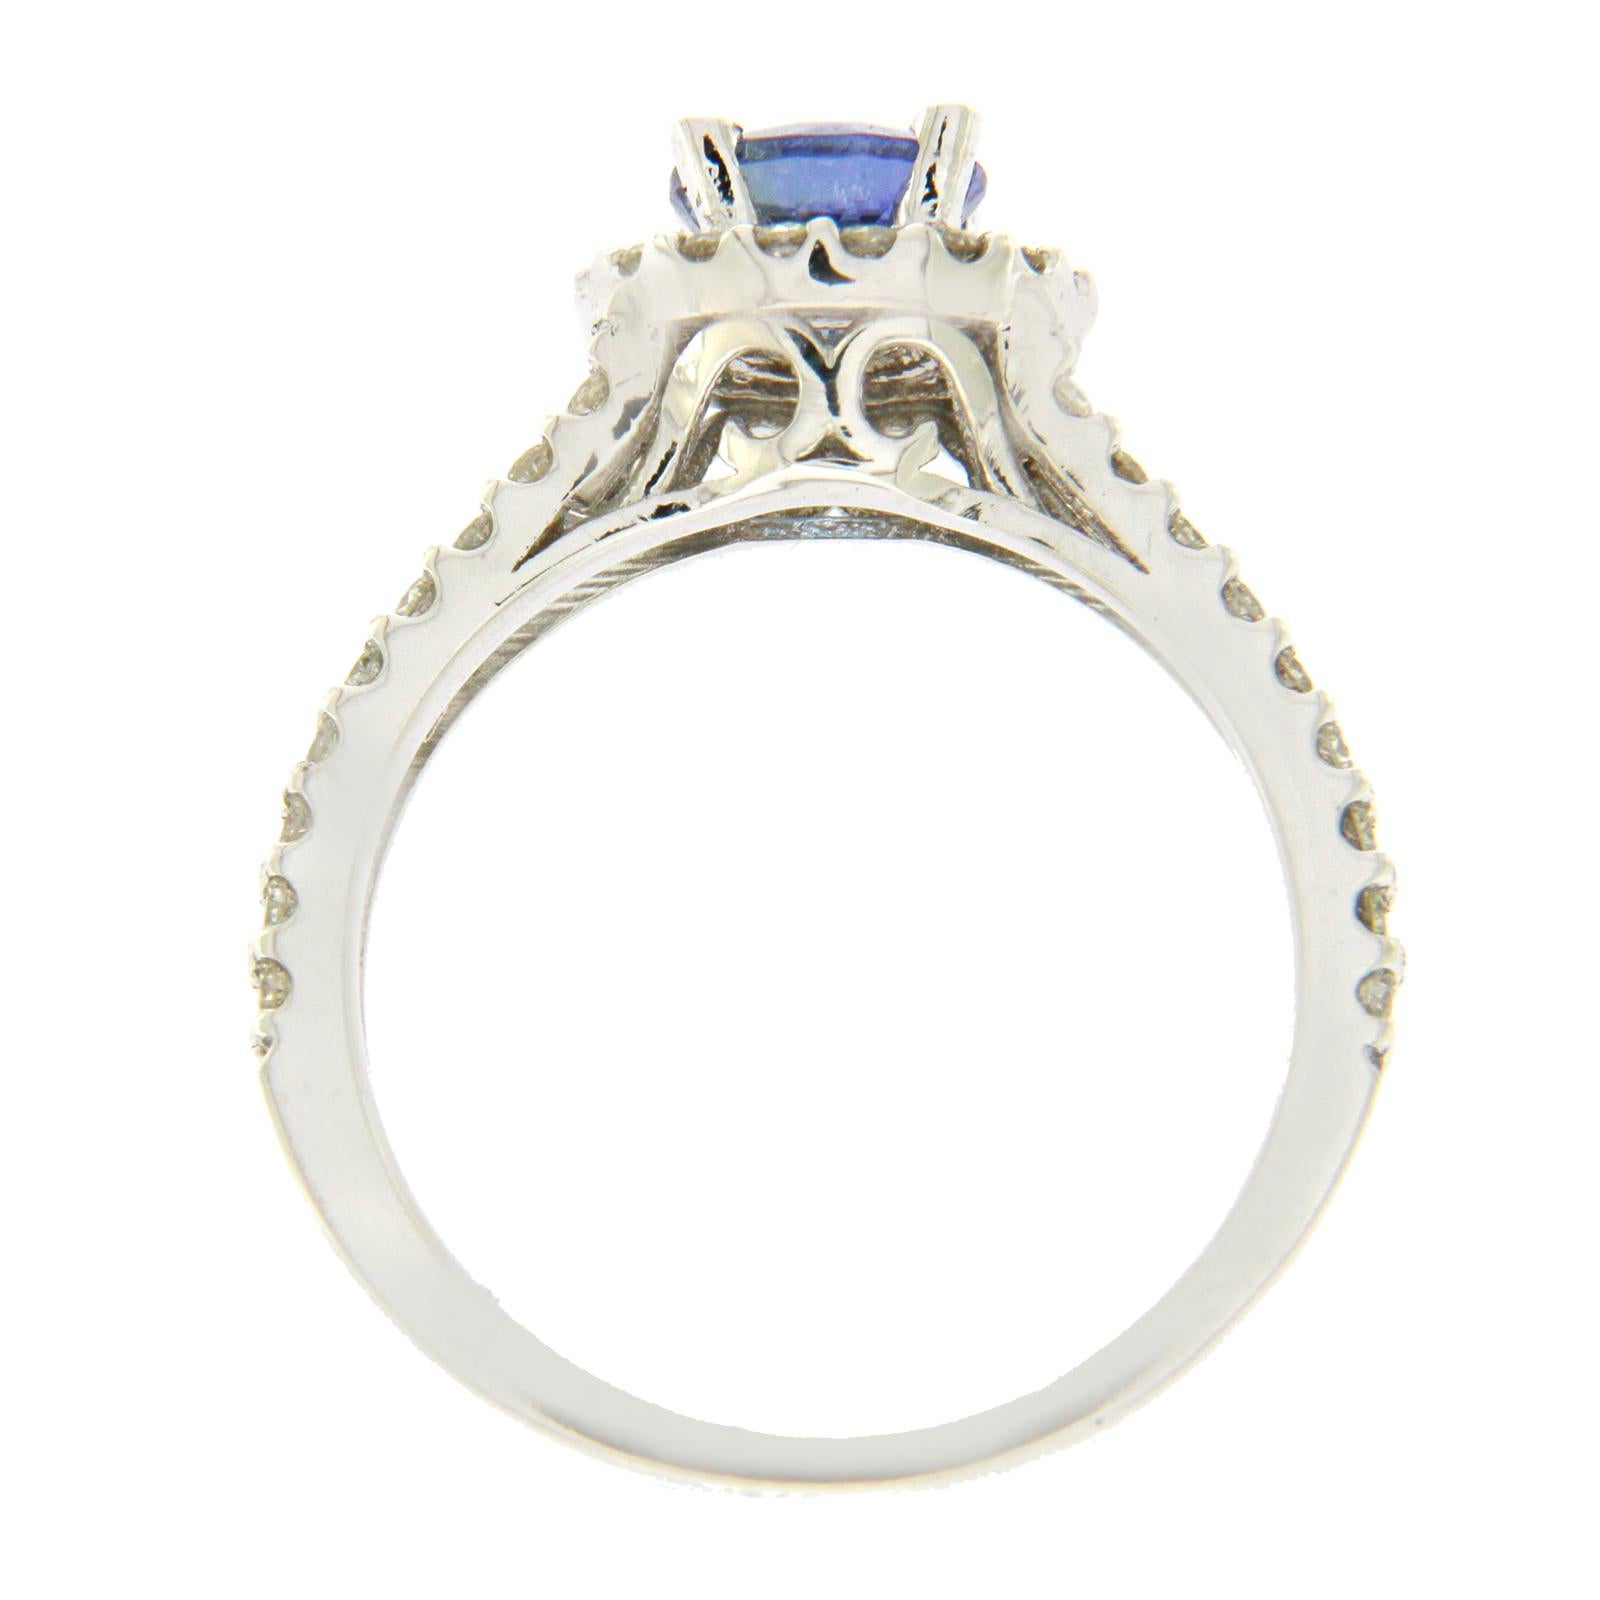 Type: Ring
Top:9 mm
Band Width: 2.4 mm
Metal: White Gold
Metal Purity: 14K
Size:6 to 9
Hallmarks: 14K
Total Weight: 4 Grams
Stone Type: 0.80 CT Natural Blue Tanzanite and 0.78 CT SI1 G Diamonds
Condition: New
Stock Number: DR16-3
..

Please Message